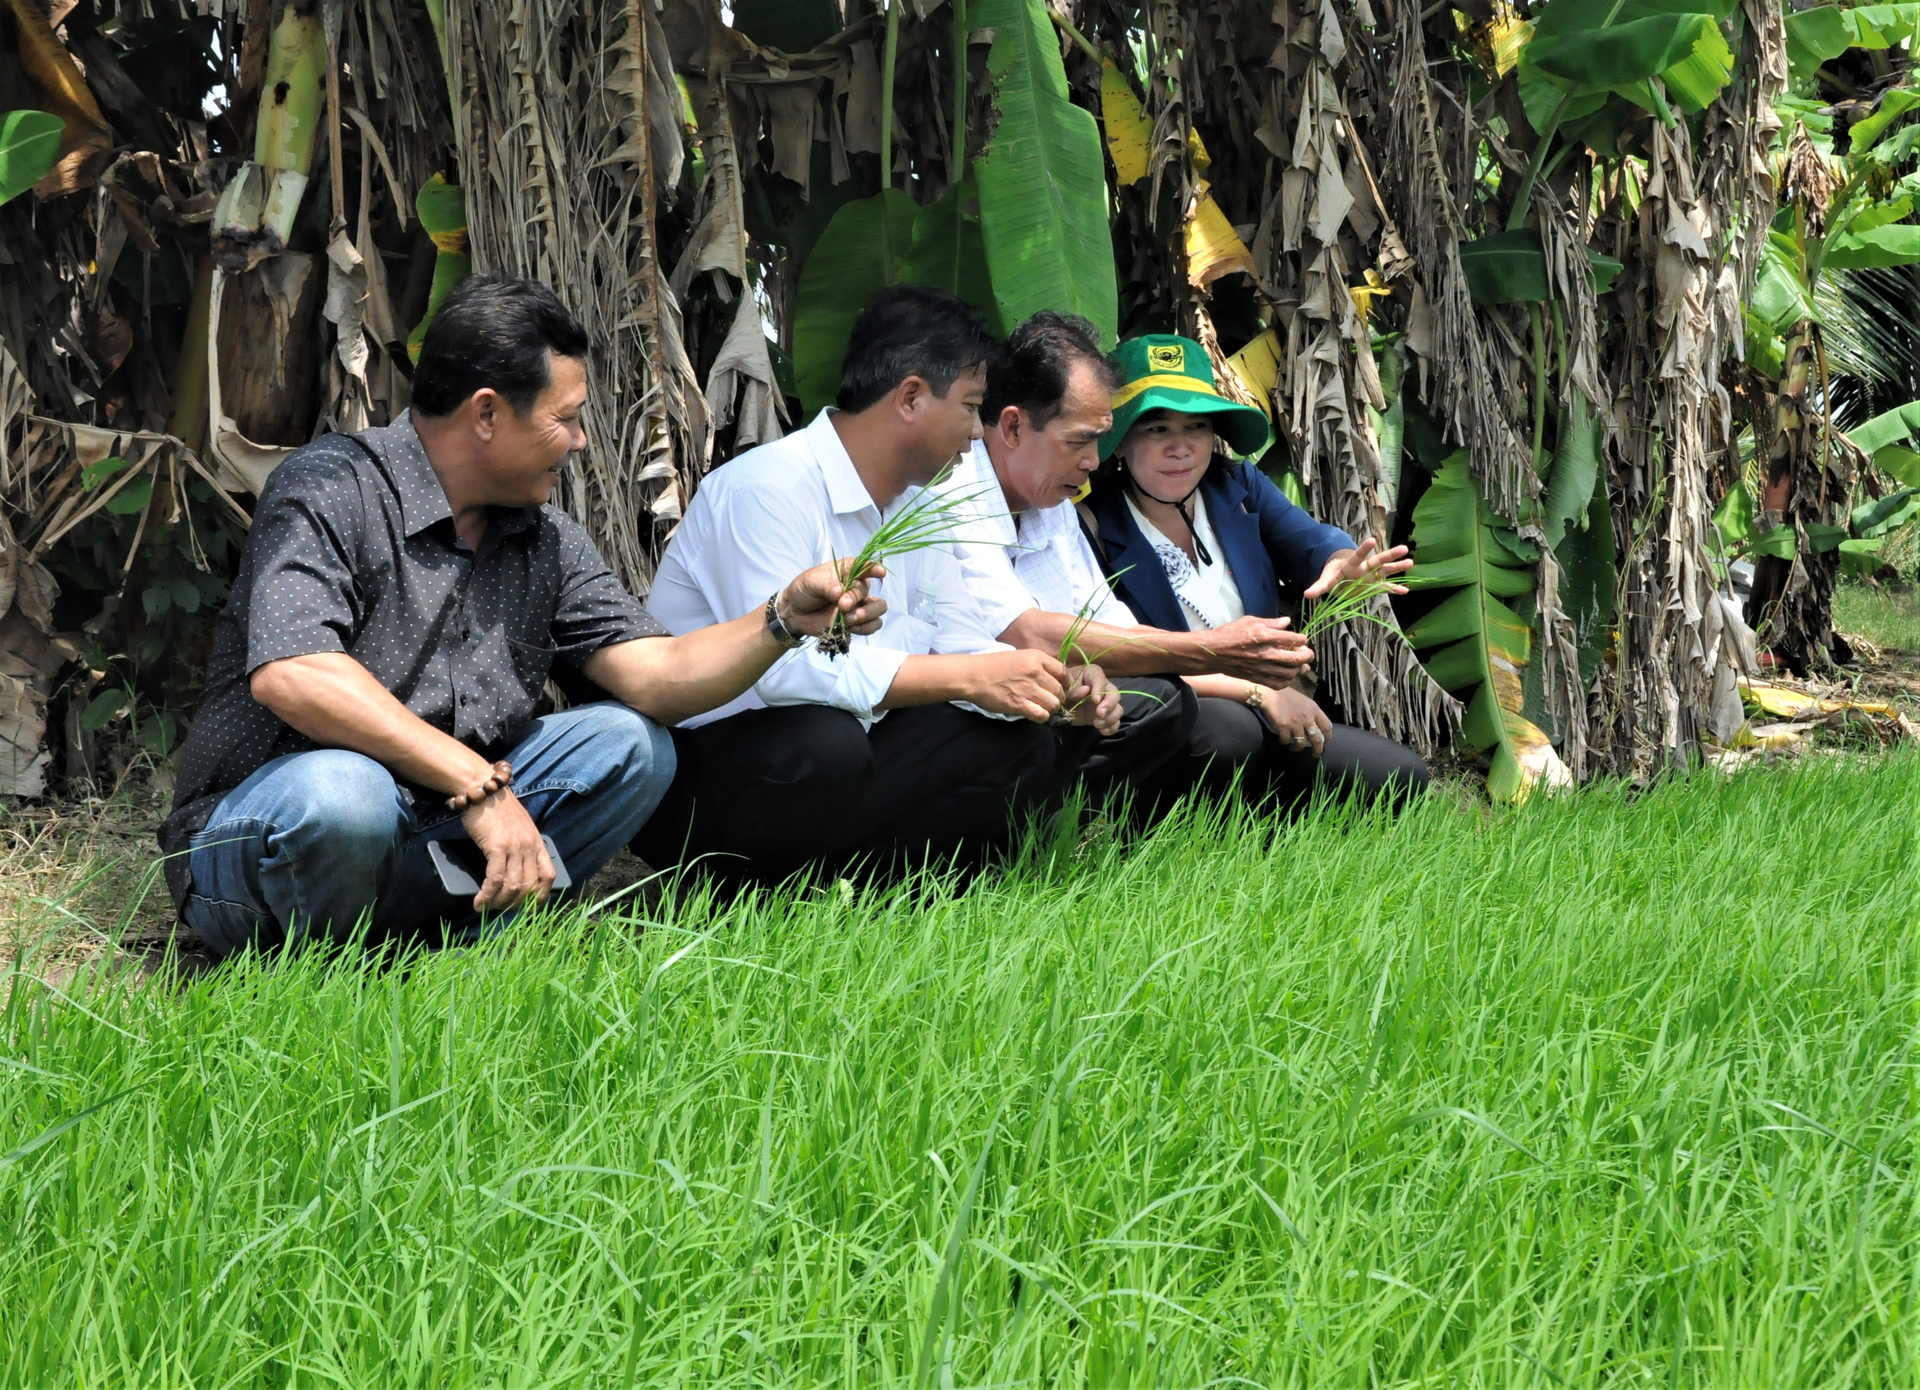 Businesses have contracted 260 hectares of organic rice production area on shrimp-farming land in An Minh district for the 2023-2024 Winter-Spring crop, with the aim of producing premium rice for domestic consumption as well as export. Photo: Trung Chanh.